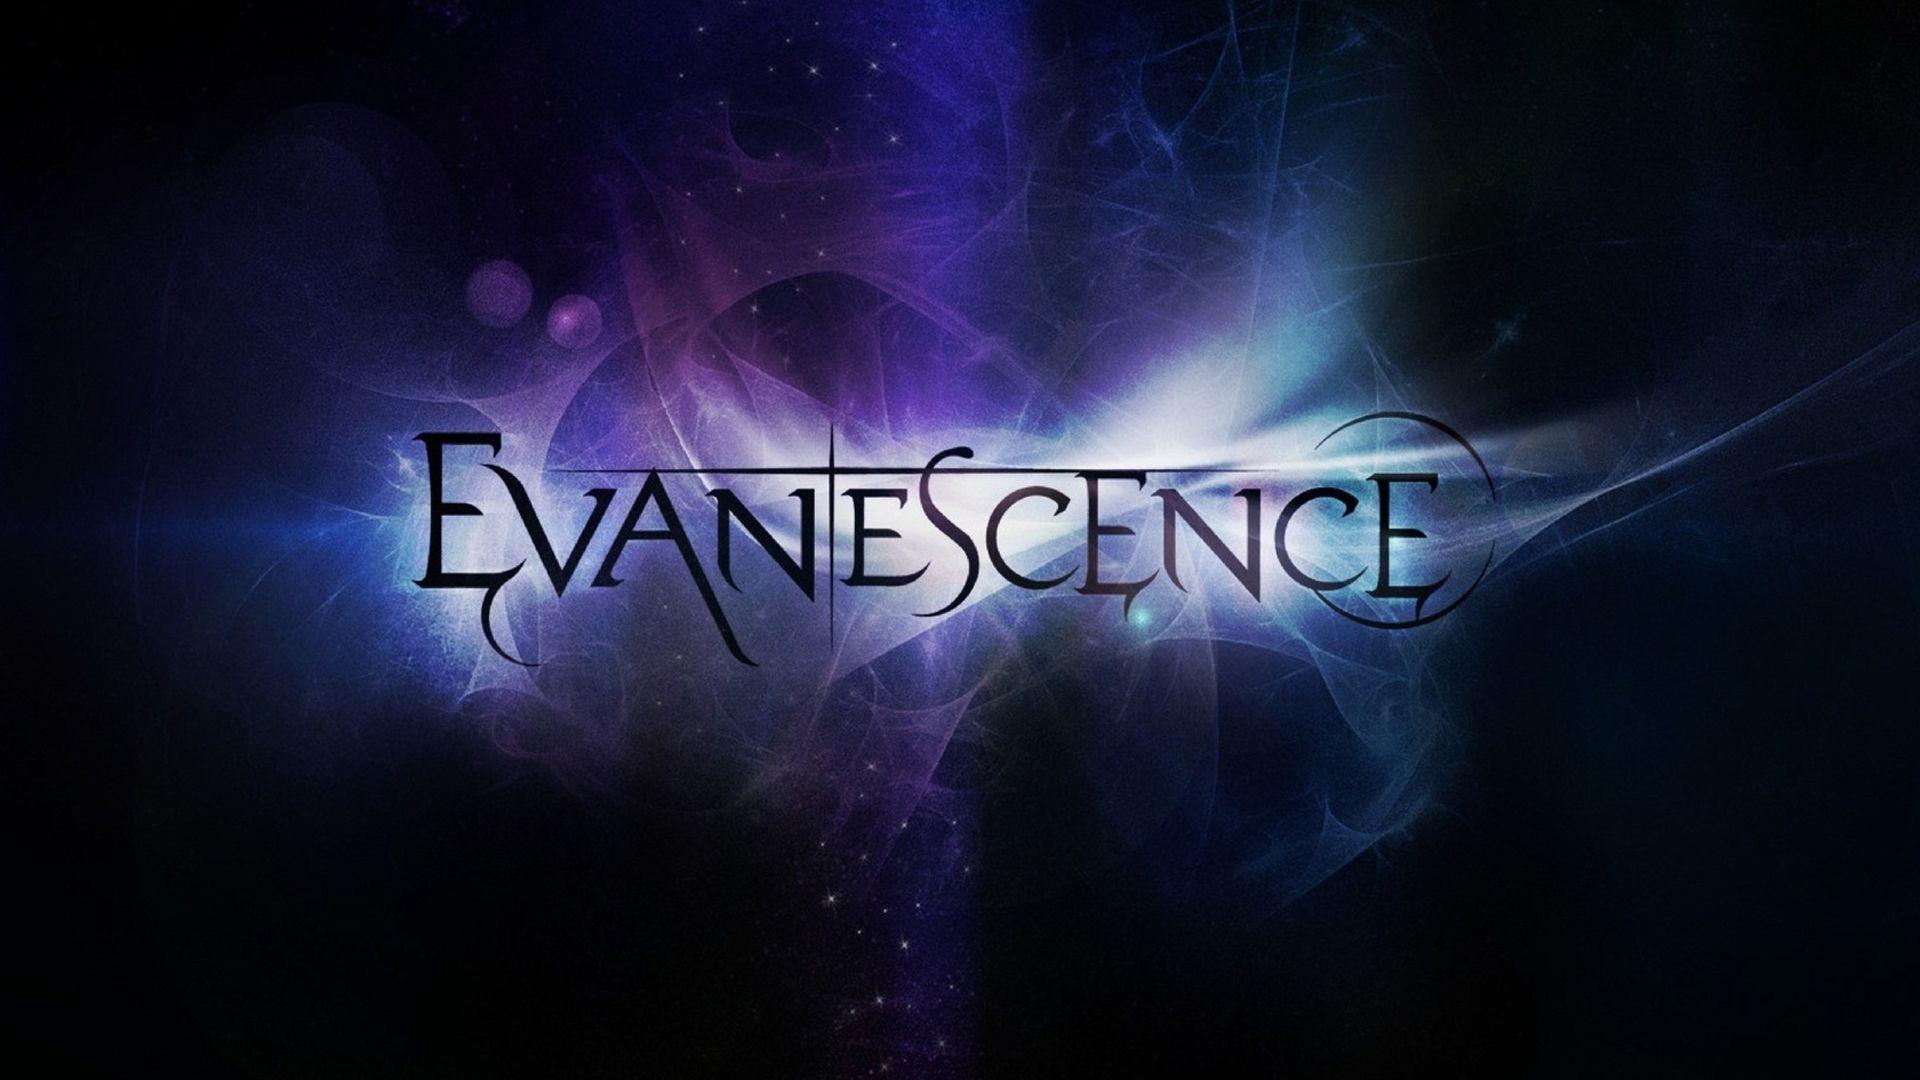 Evanescence Logo. Evanescence Logo HD Wallpaper. This is absolutely